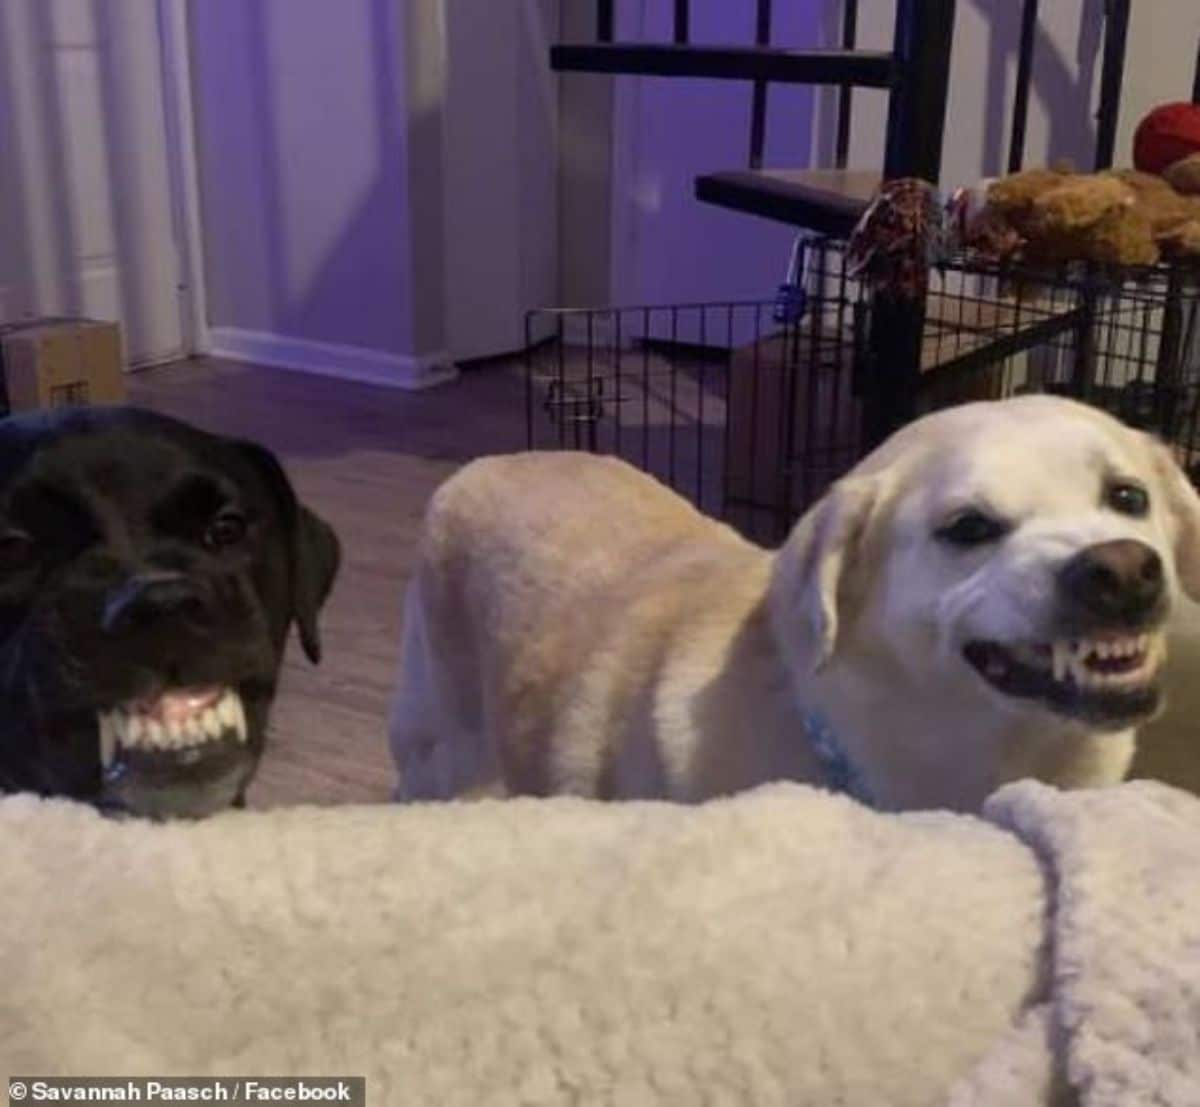 black dog and white dog standing at a white sofa and smiling with their teeth showing like a snarl